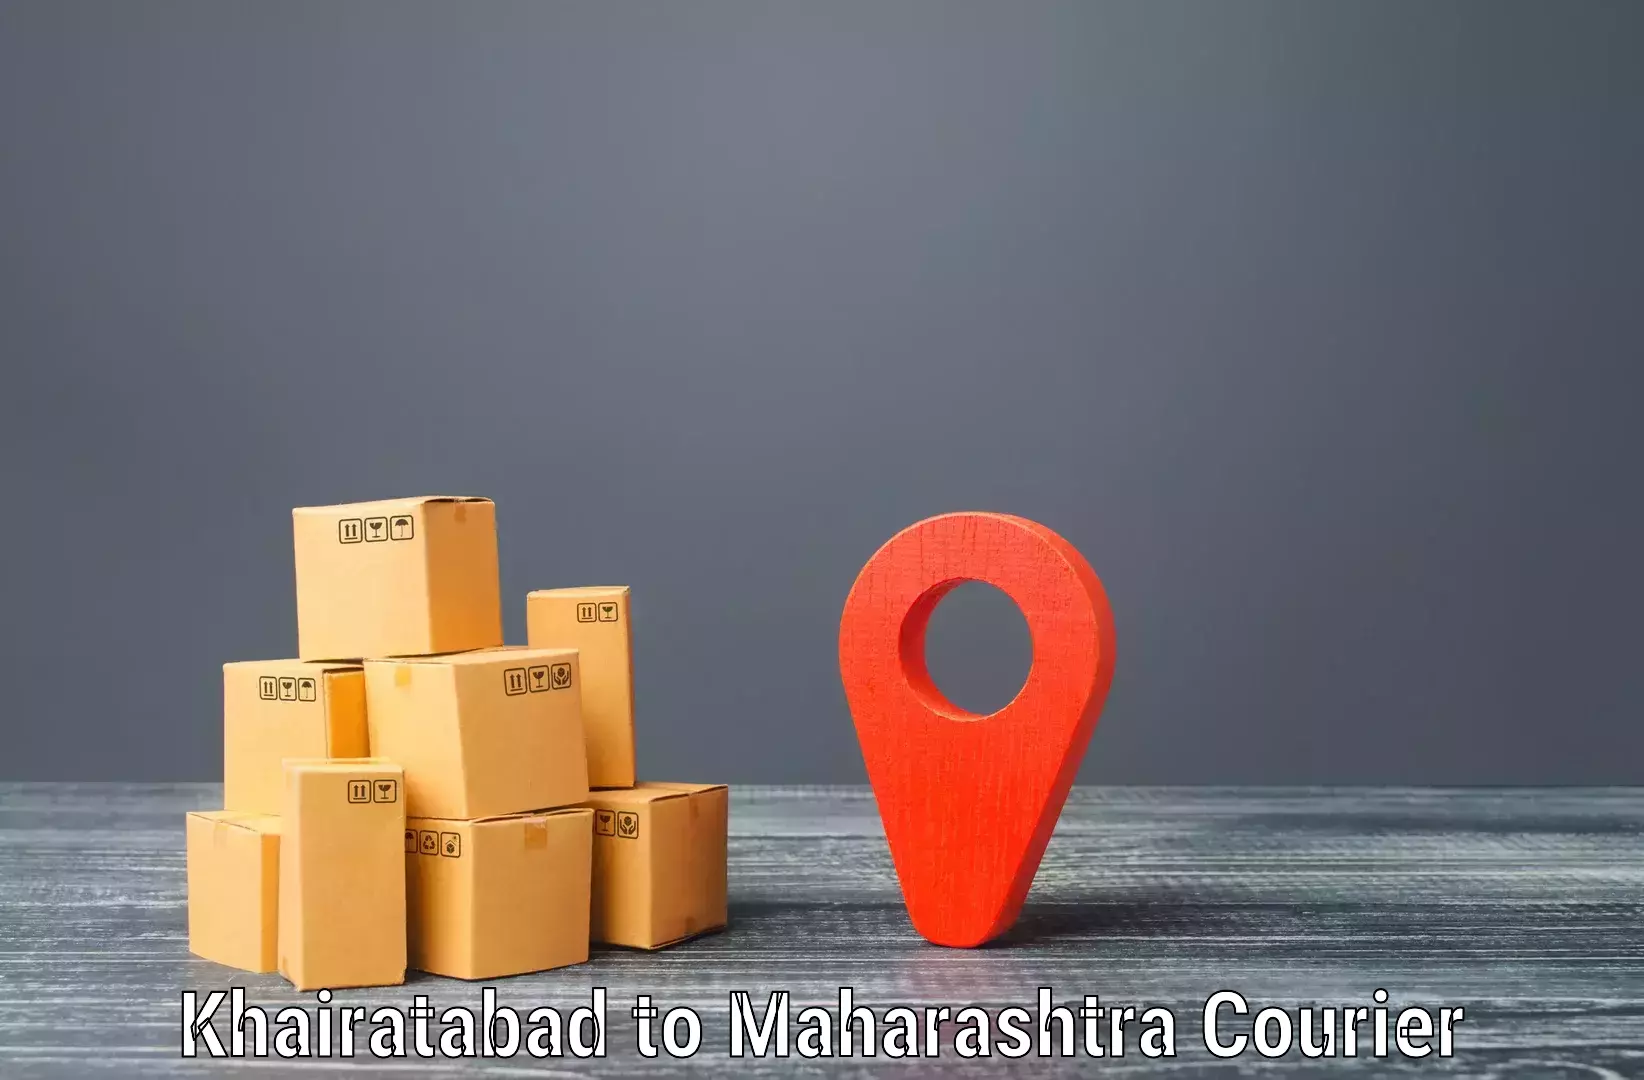 Versatile courier offerings Khairatabad to Nagpur